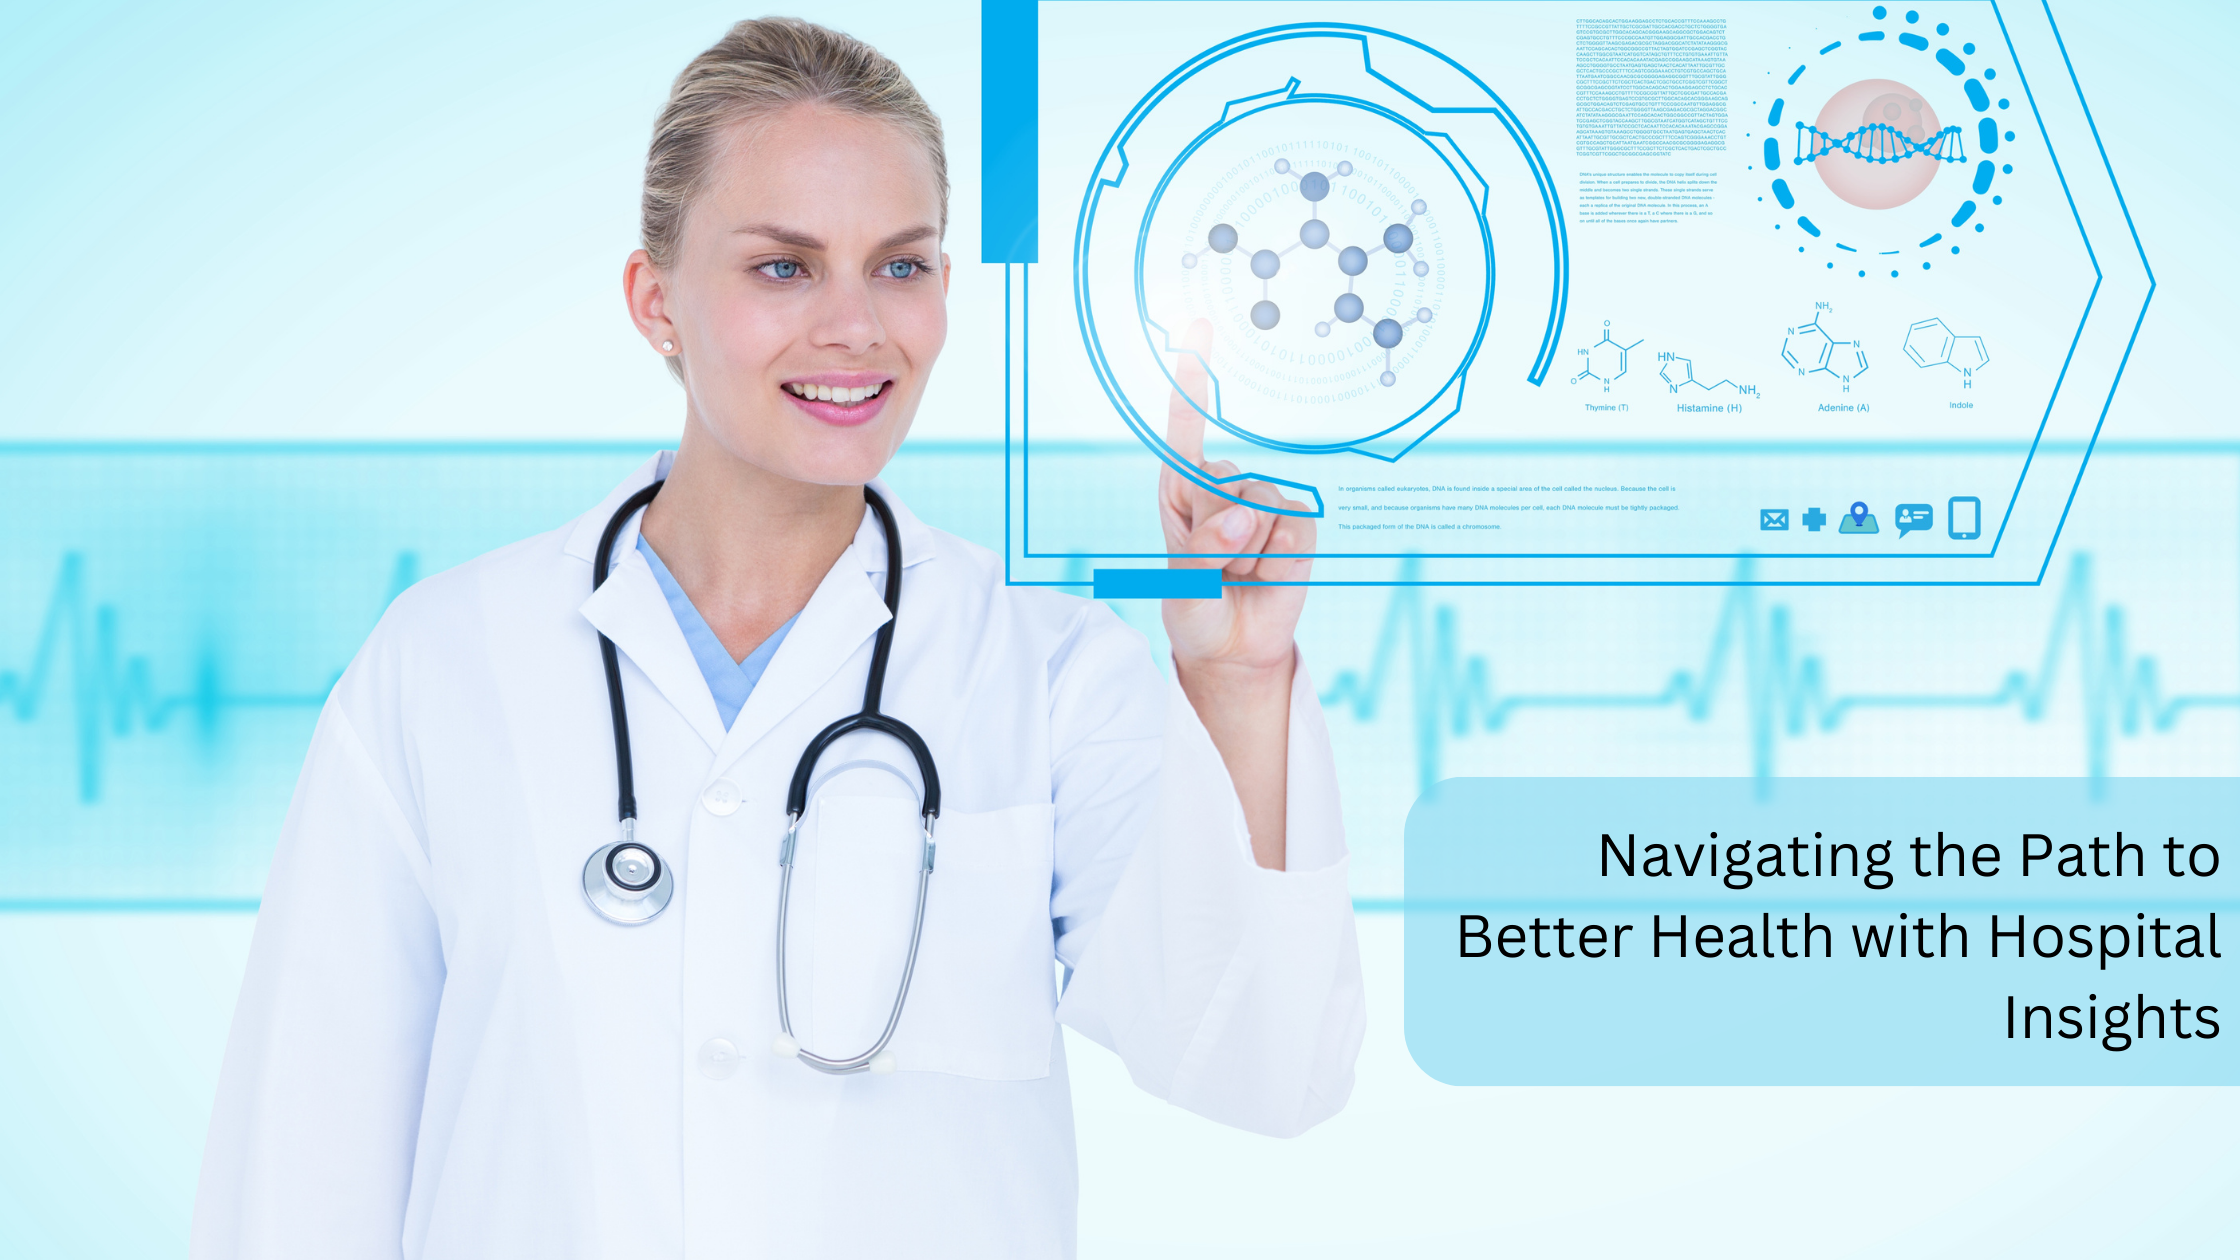 Navigating the Path to Better Health with Hospital Insights